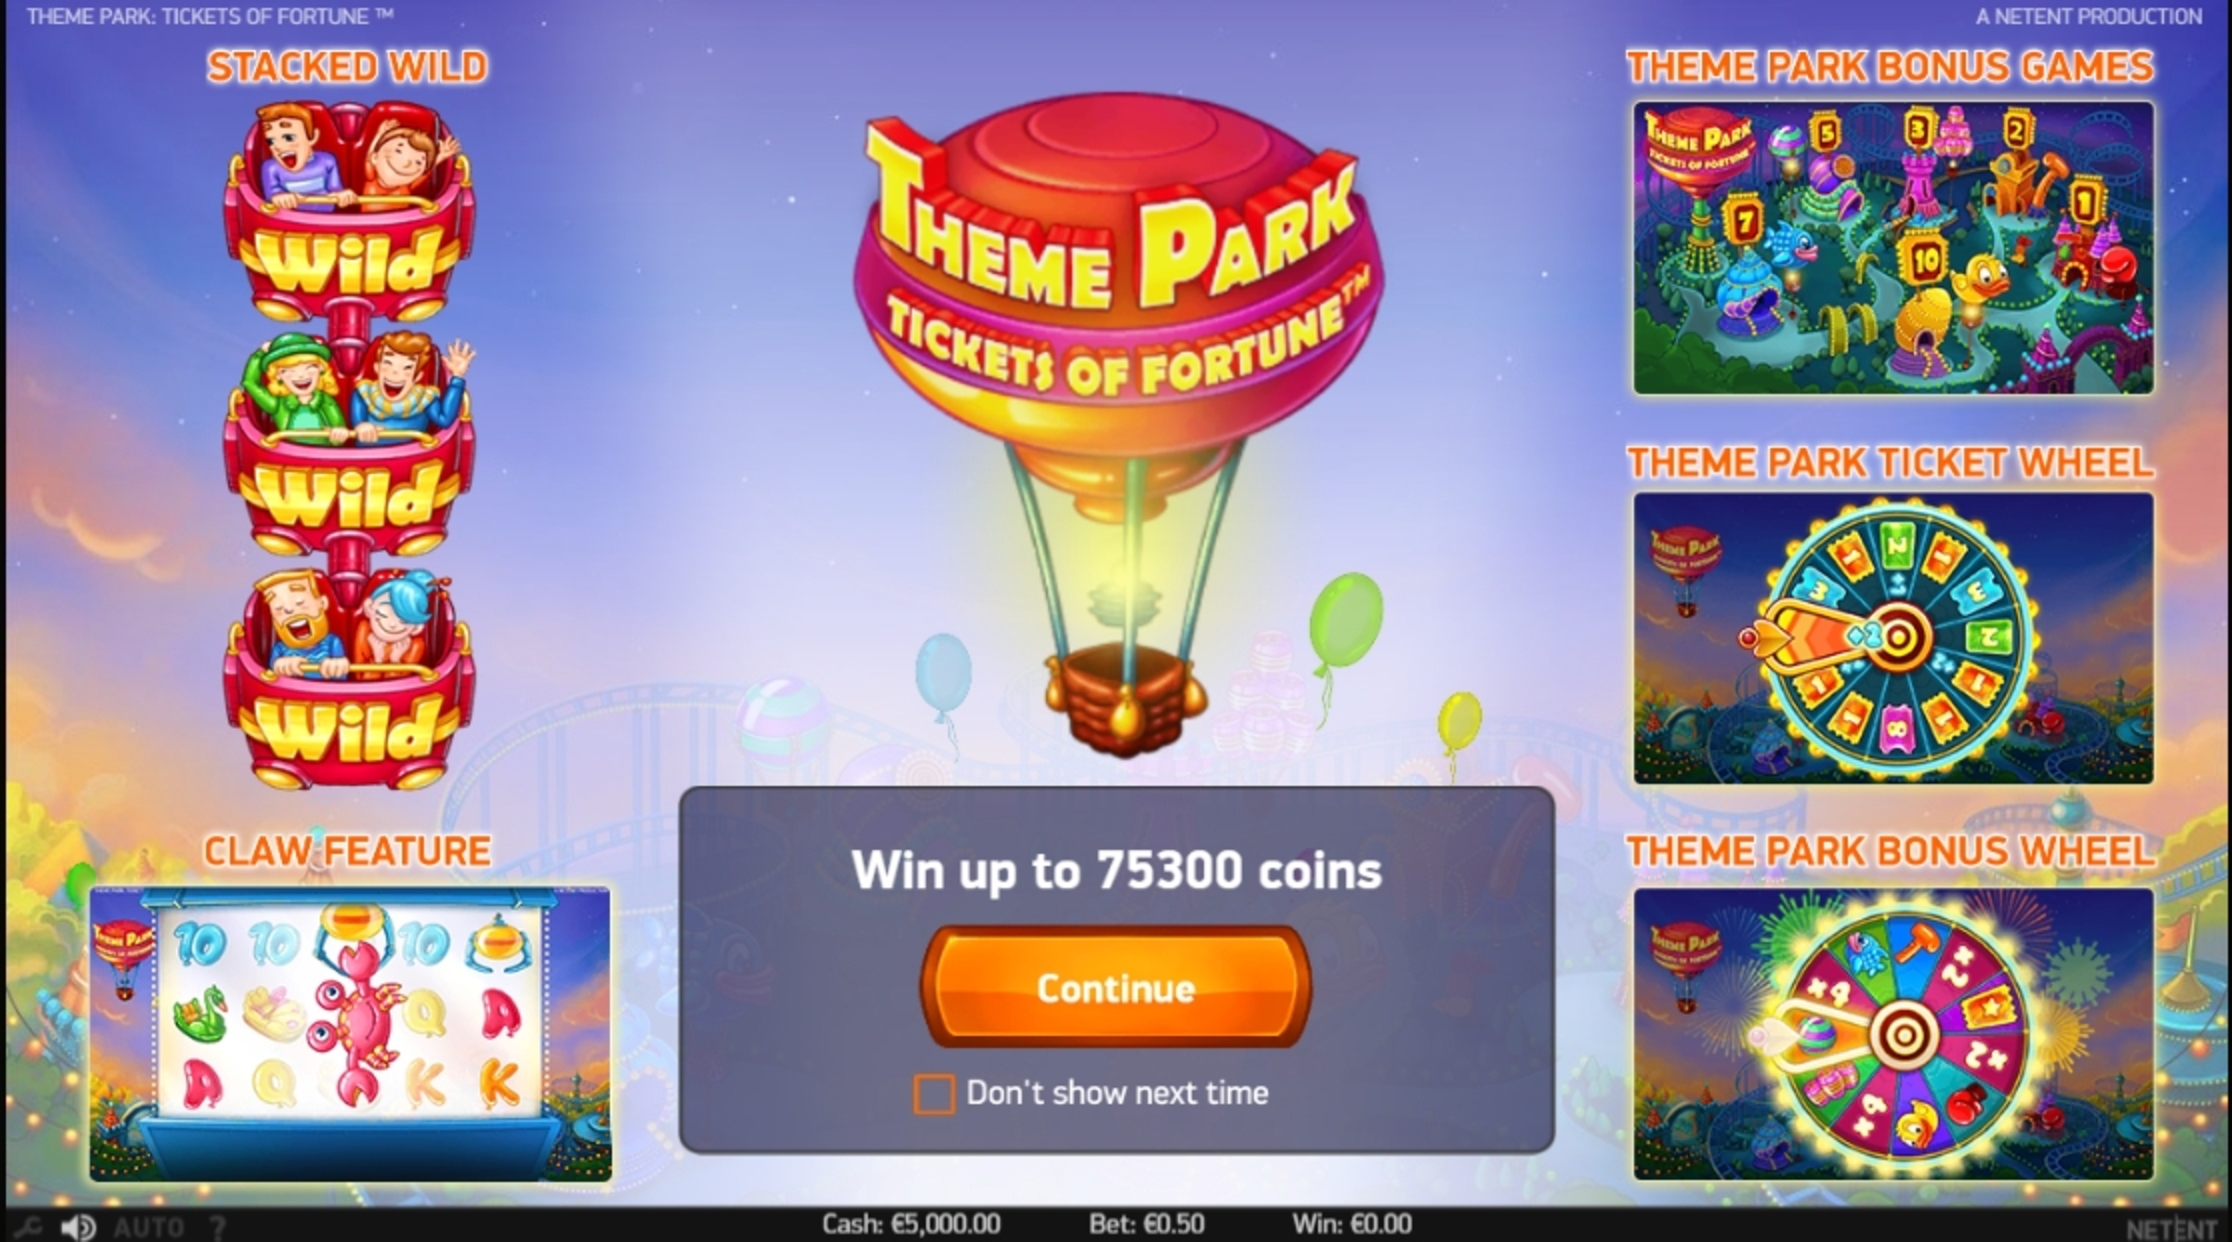 Play Theme Park: Tickets of Fortune Free Casino Slot Game by NetEnt